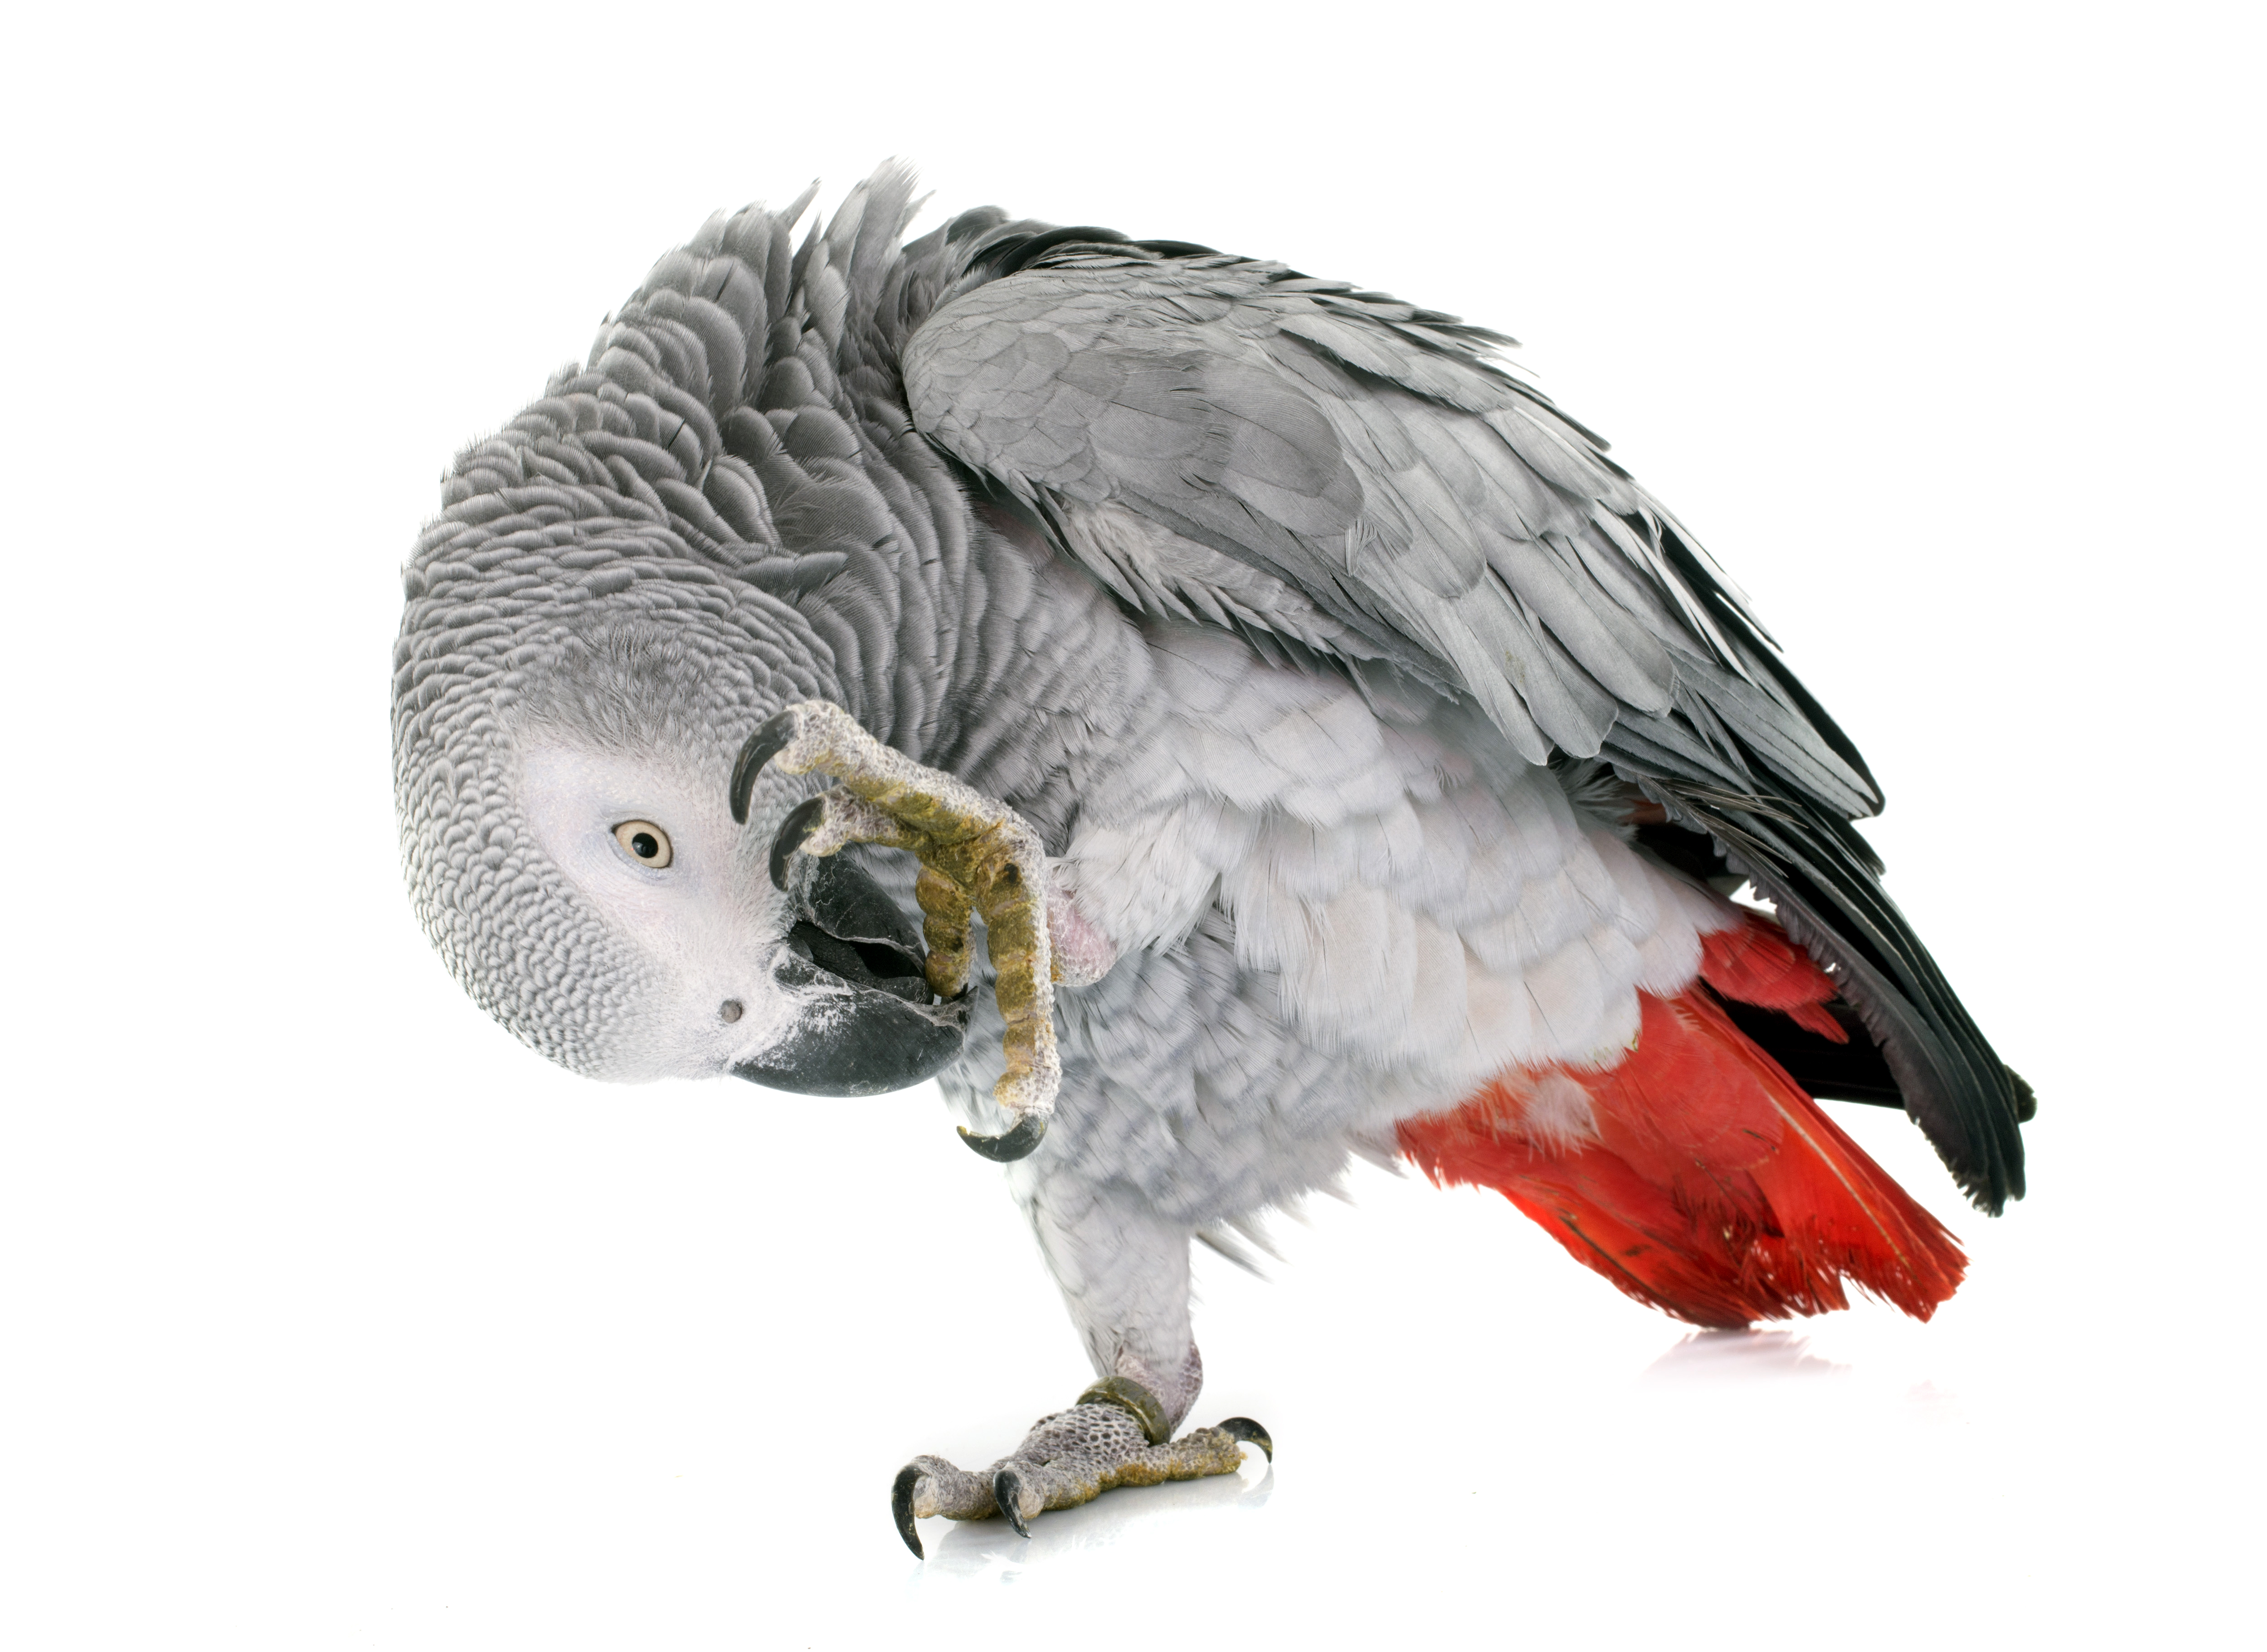 Animal African grey parrot HD Wallpaper | Background Image